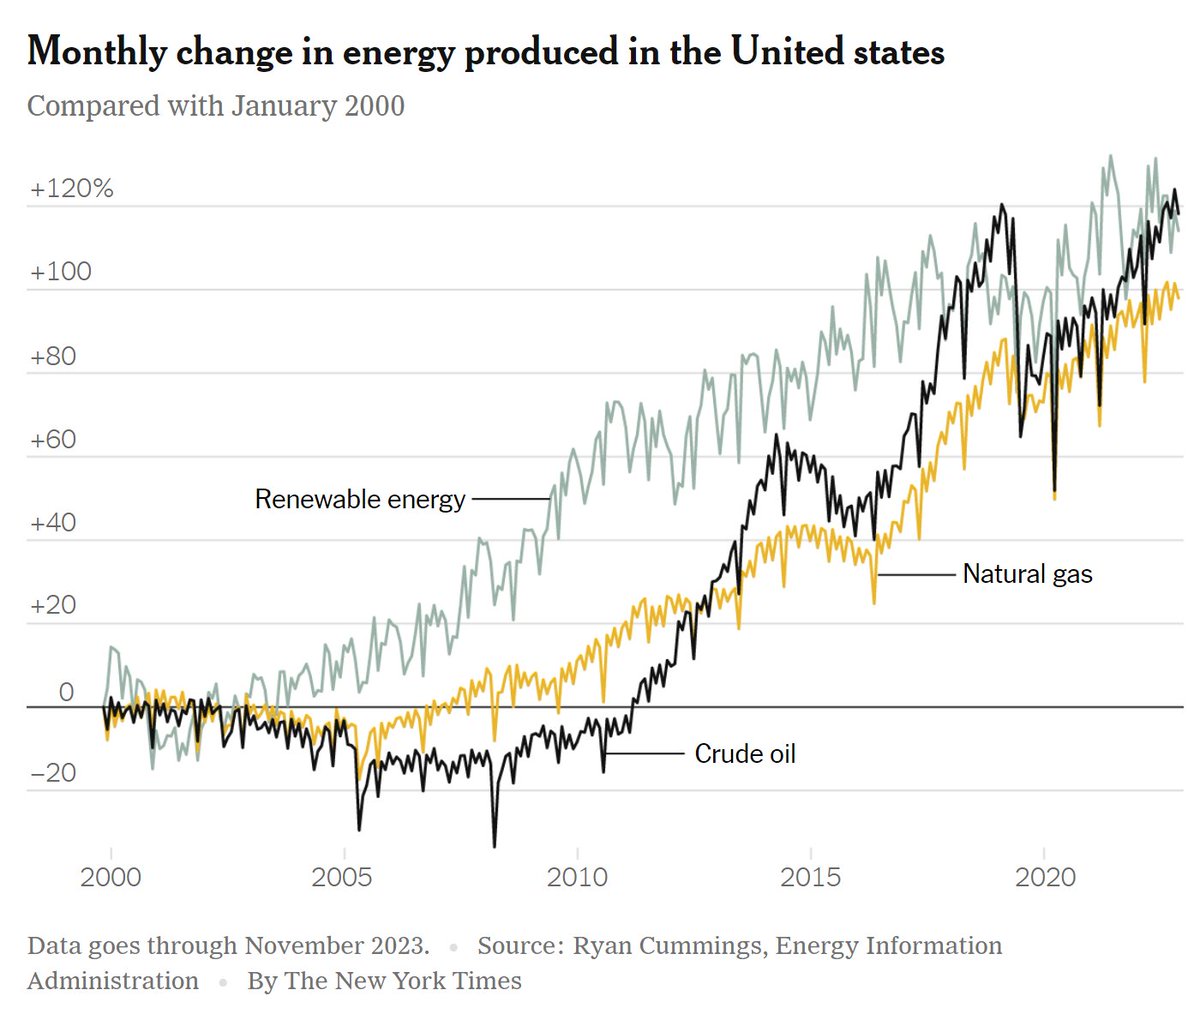 Oil, gas, and renewable energy production are at all-time highs. America is more energy independent than ever.